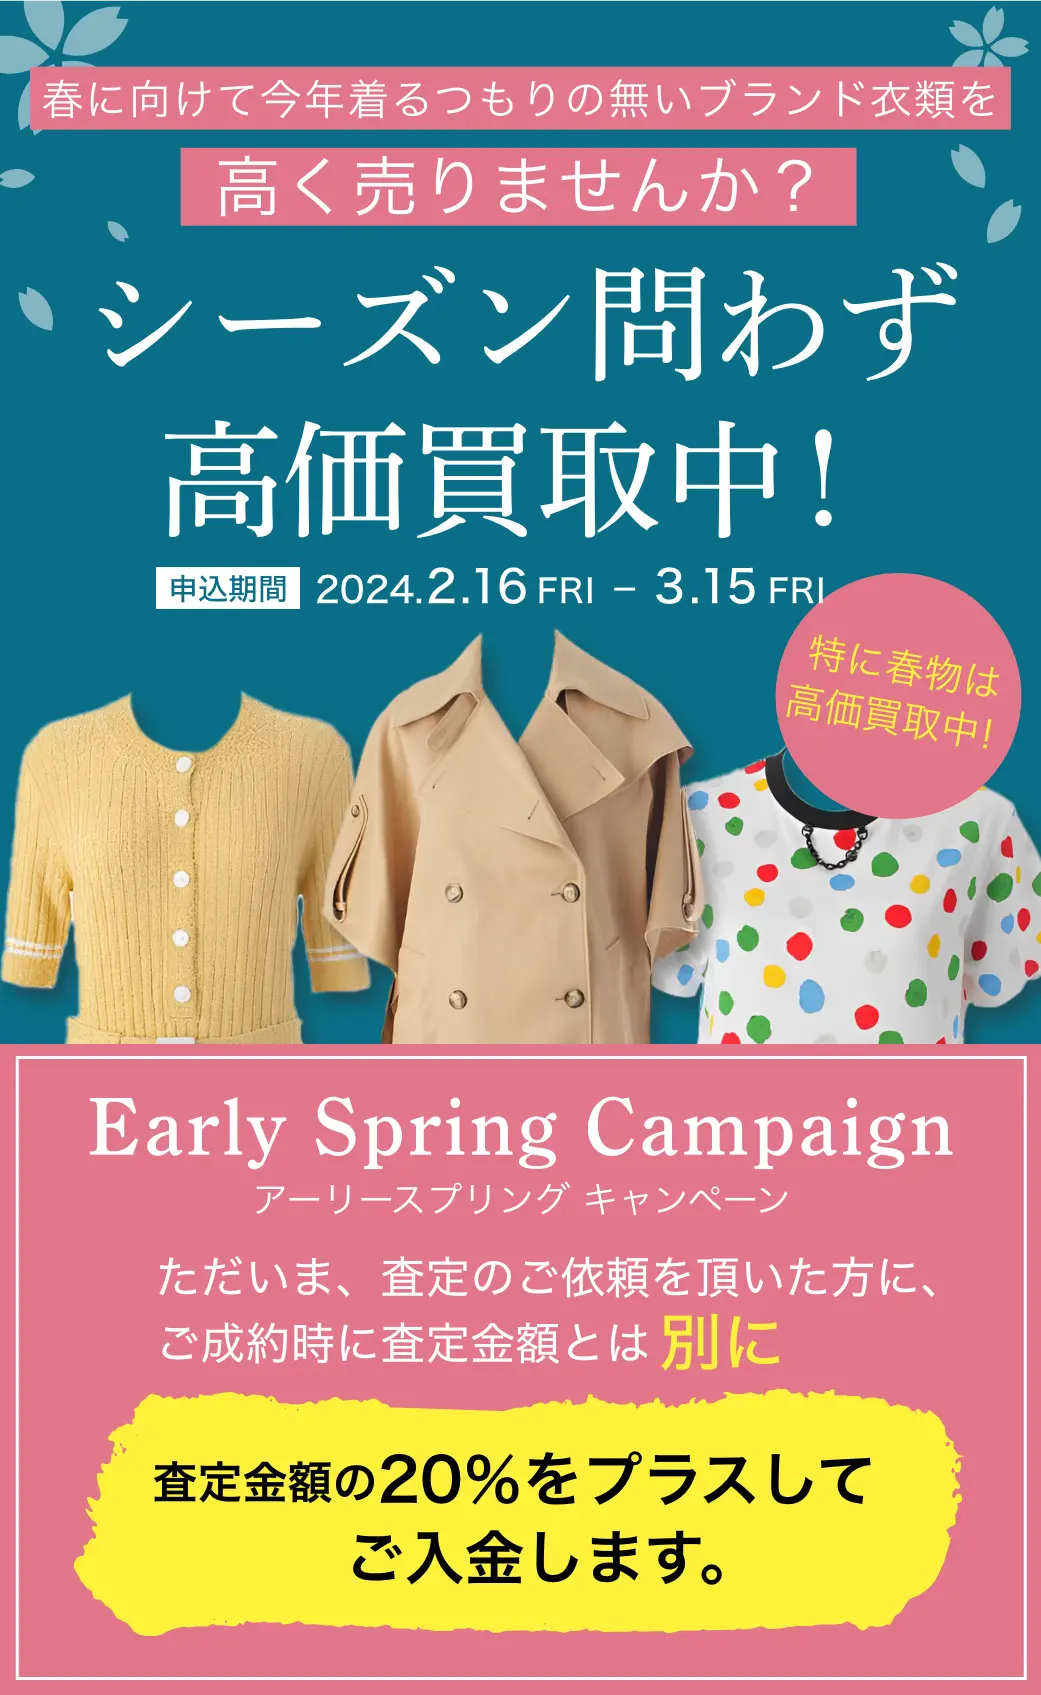 early spring campaing シーズン問わず高価買取中！